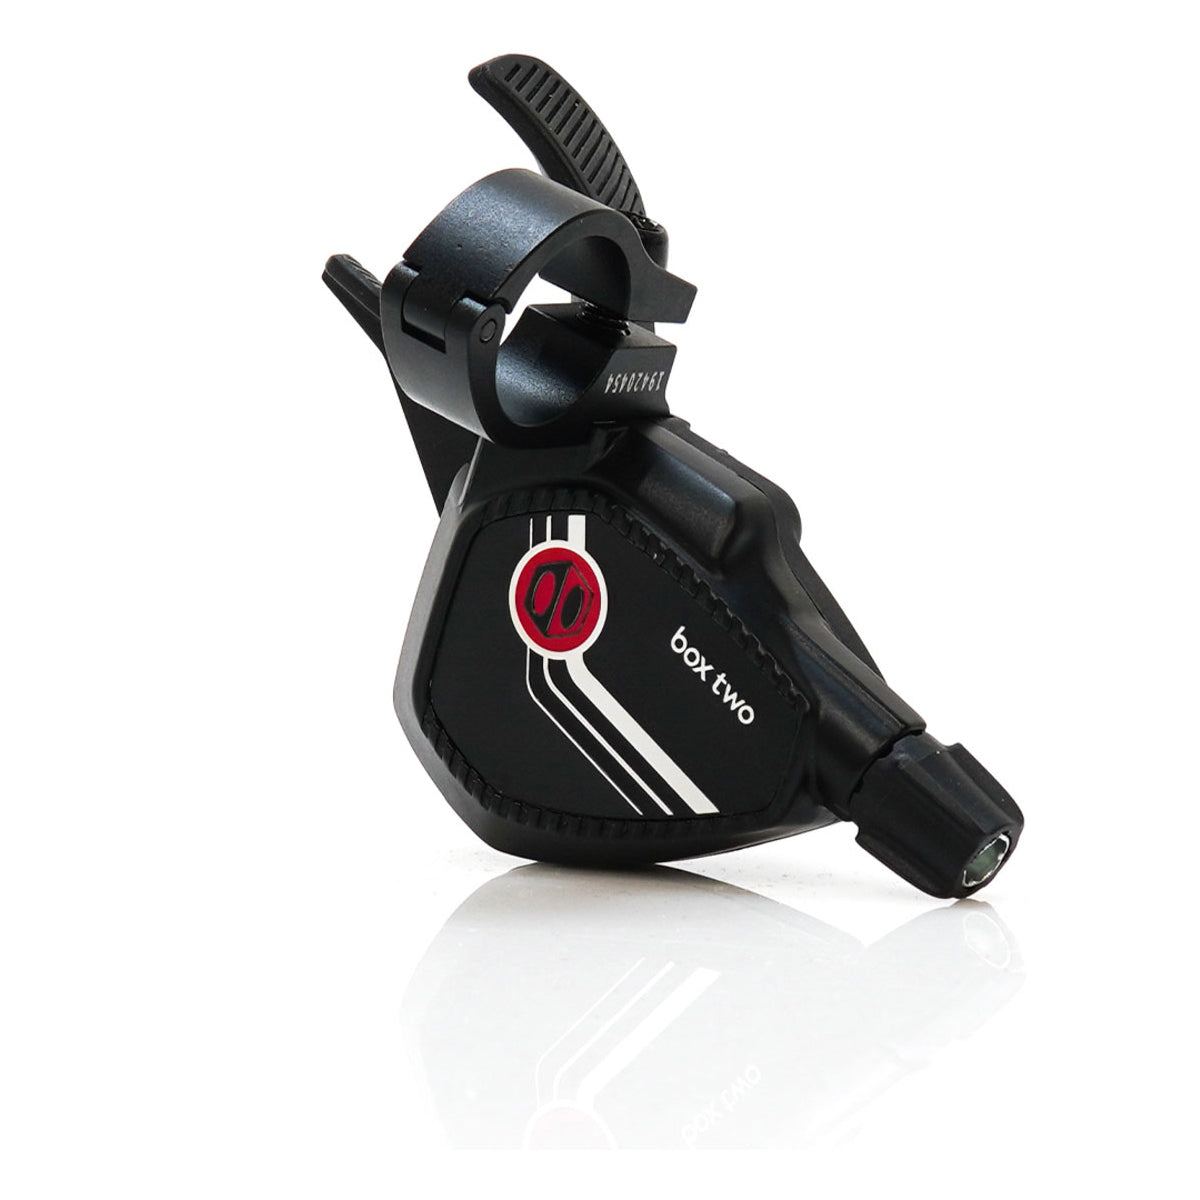 BOX Two Prime 9 Speed Twin Lever Shifter - Black - Single Shift - 22.2mm Bar Clamp - 9 Speed